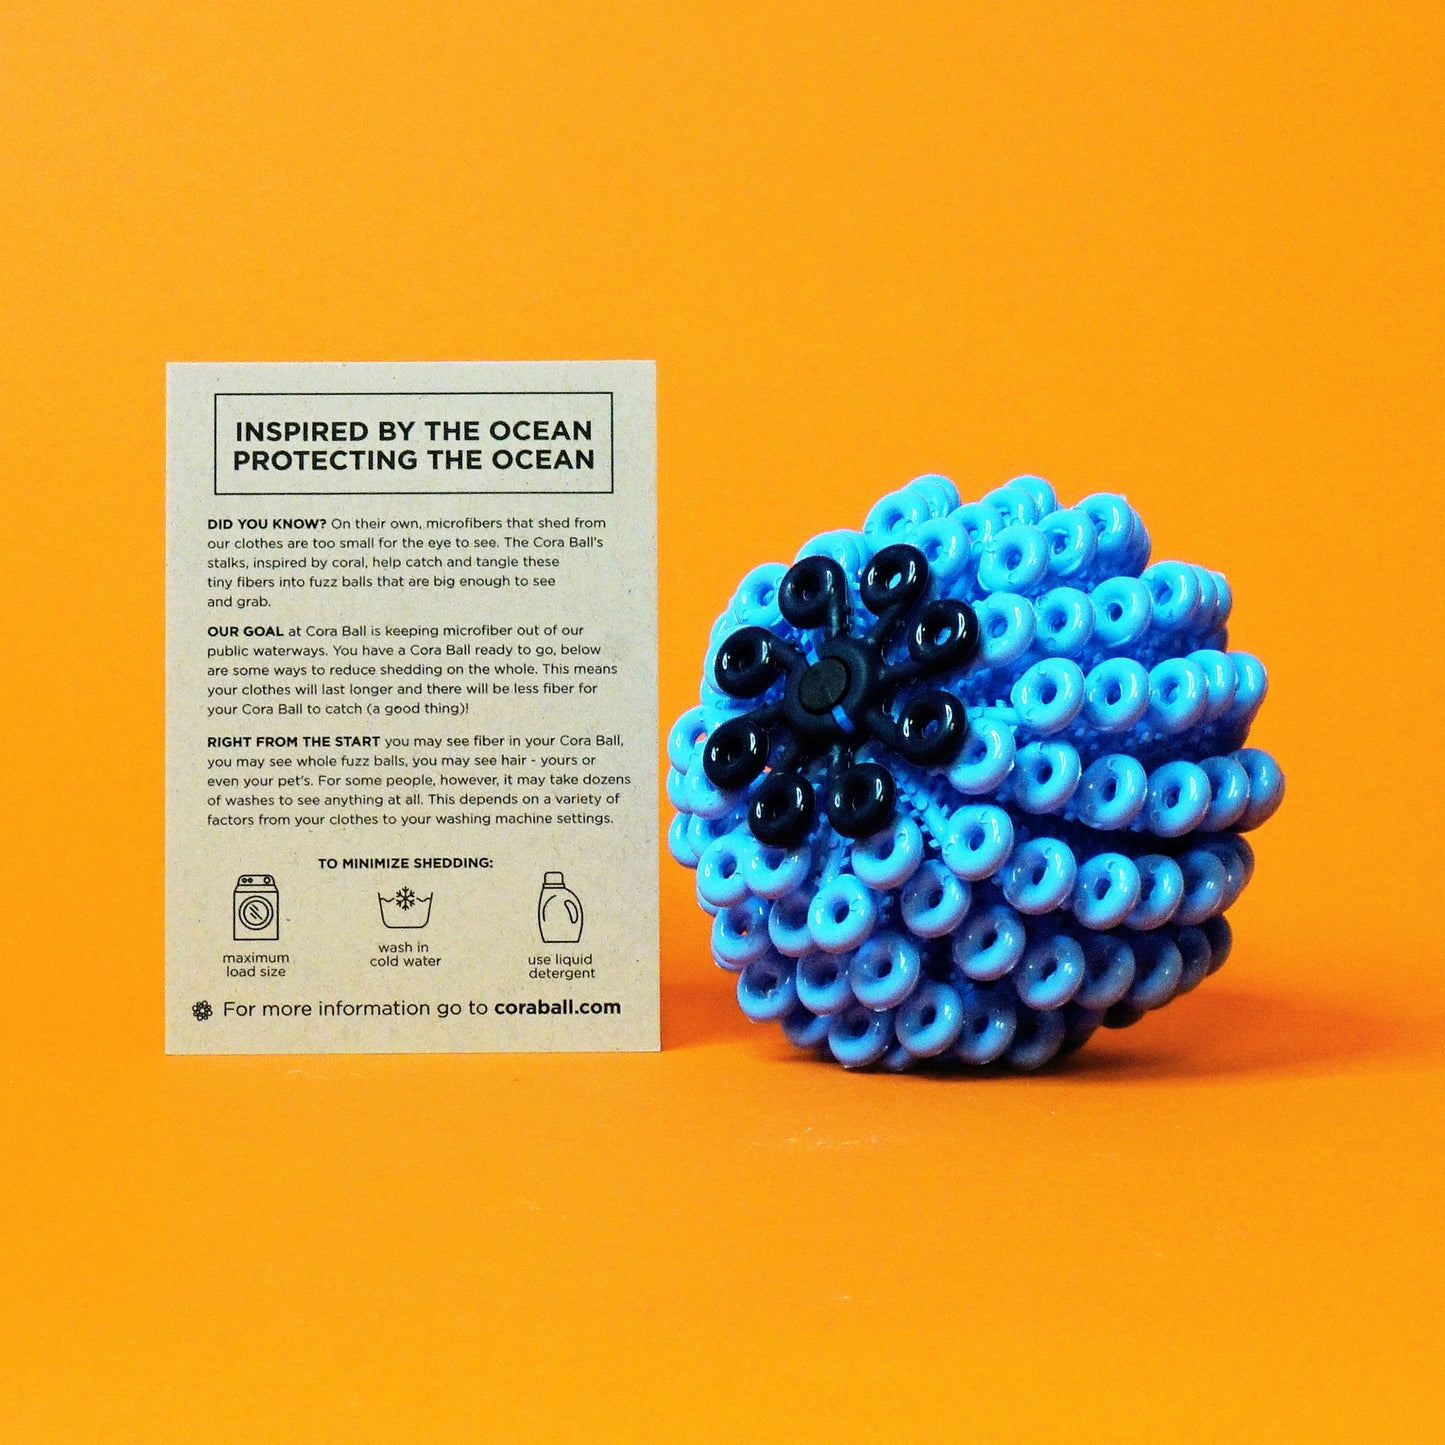 An avant-garde laundry ball used to catch microfibers displayed with an info card; the ball is blue with numerous loops, modeled after coral reef, and the backdrop is orange